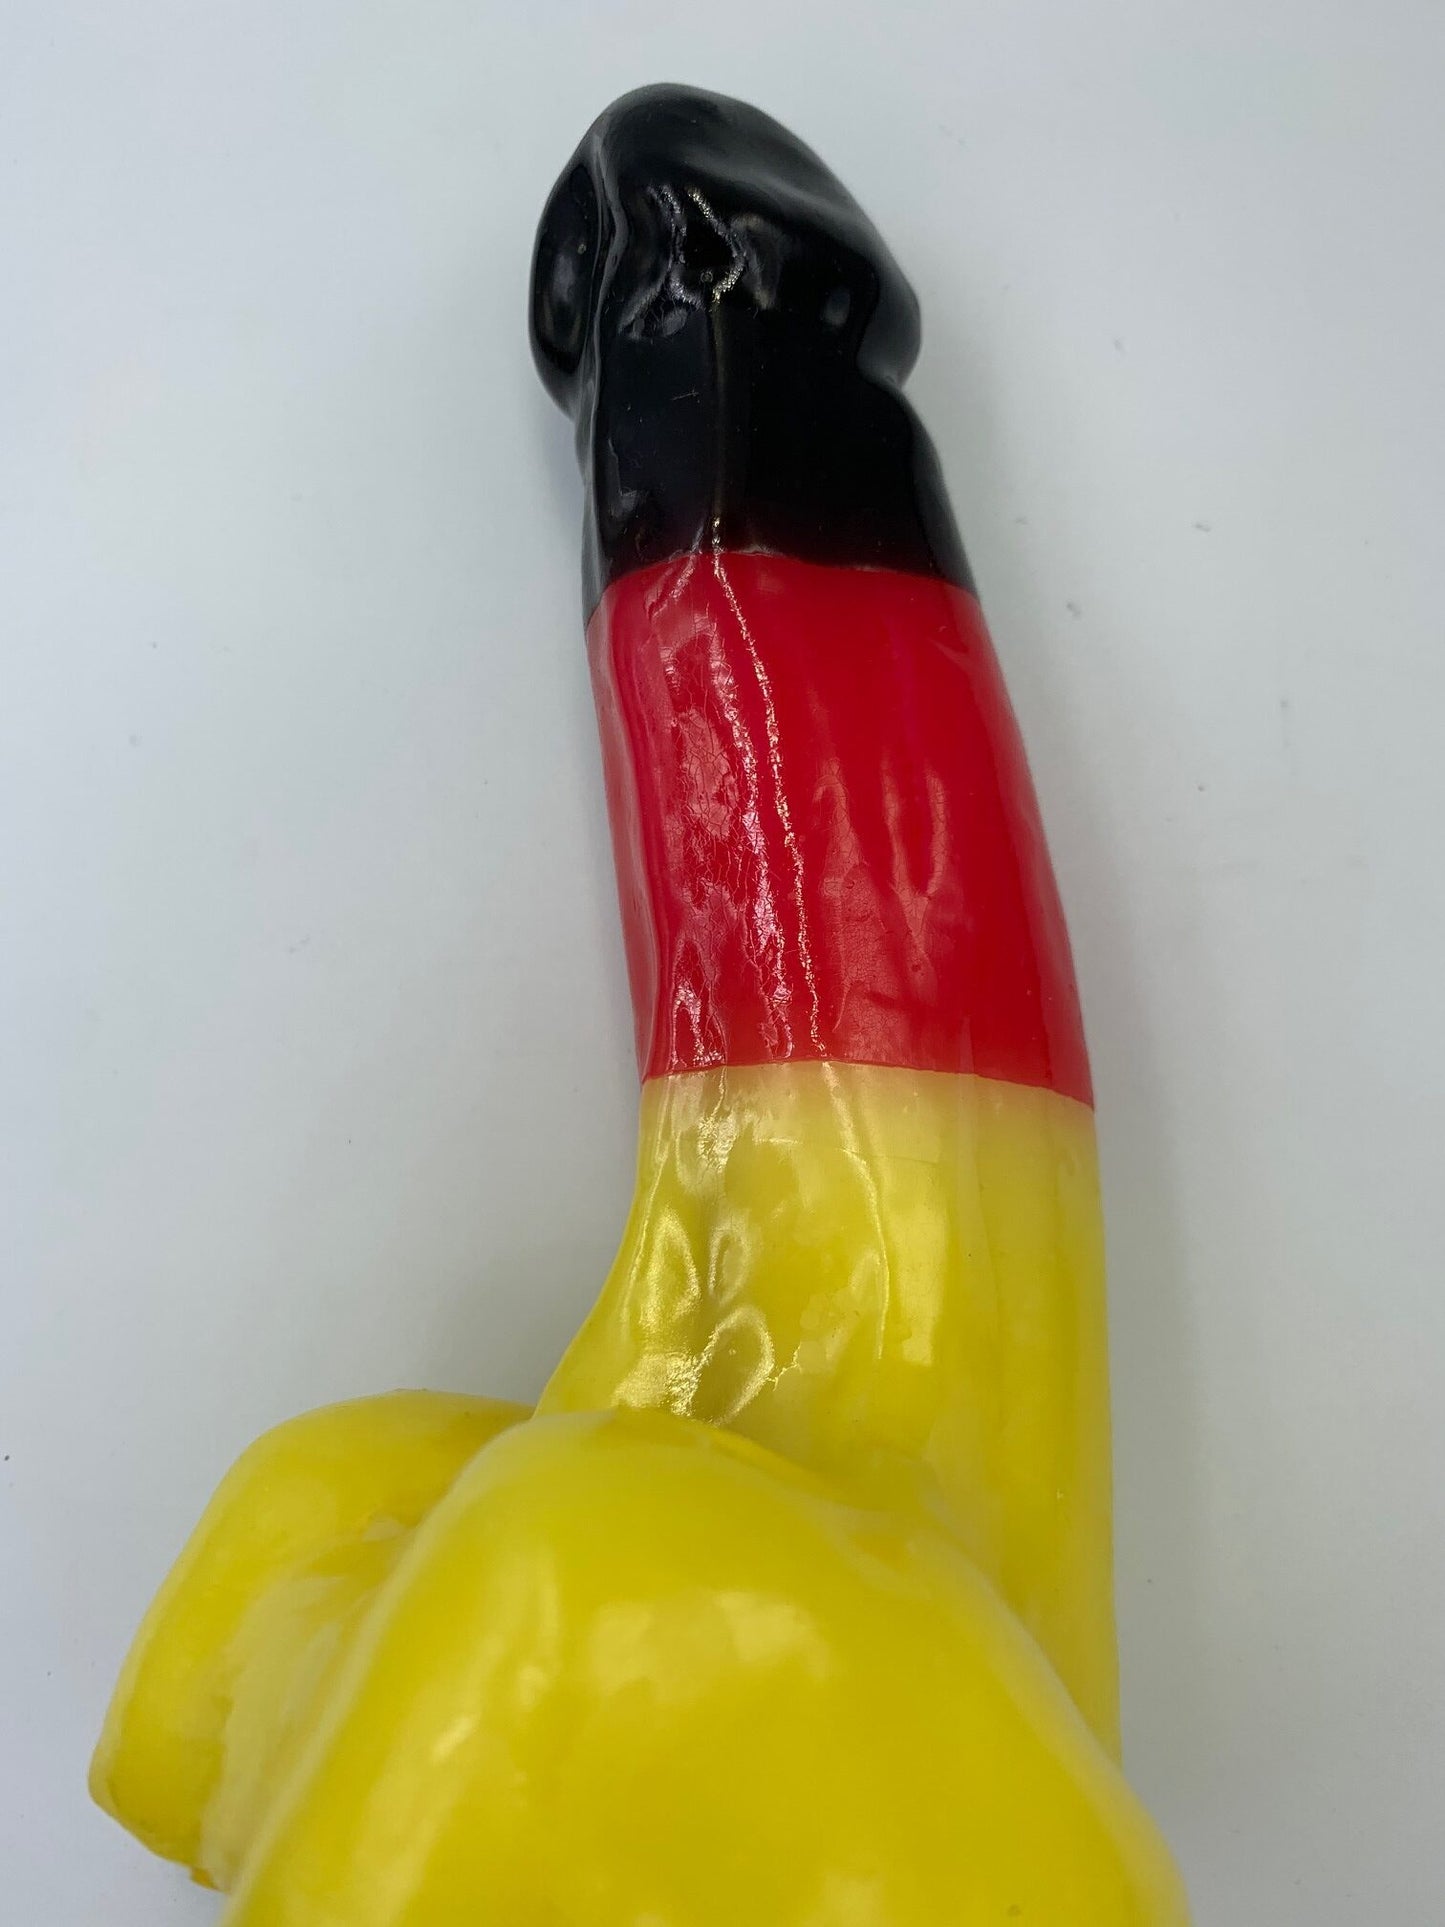 Hydas - Penis Candle - German Decoration Power - Kinky Candle - Big size 20 cm - Dia 10 cm - Black with yellow - Bulk Pack - NO Colour box - Gift item - art. hydascandle